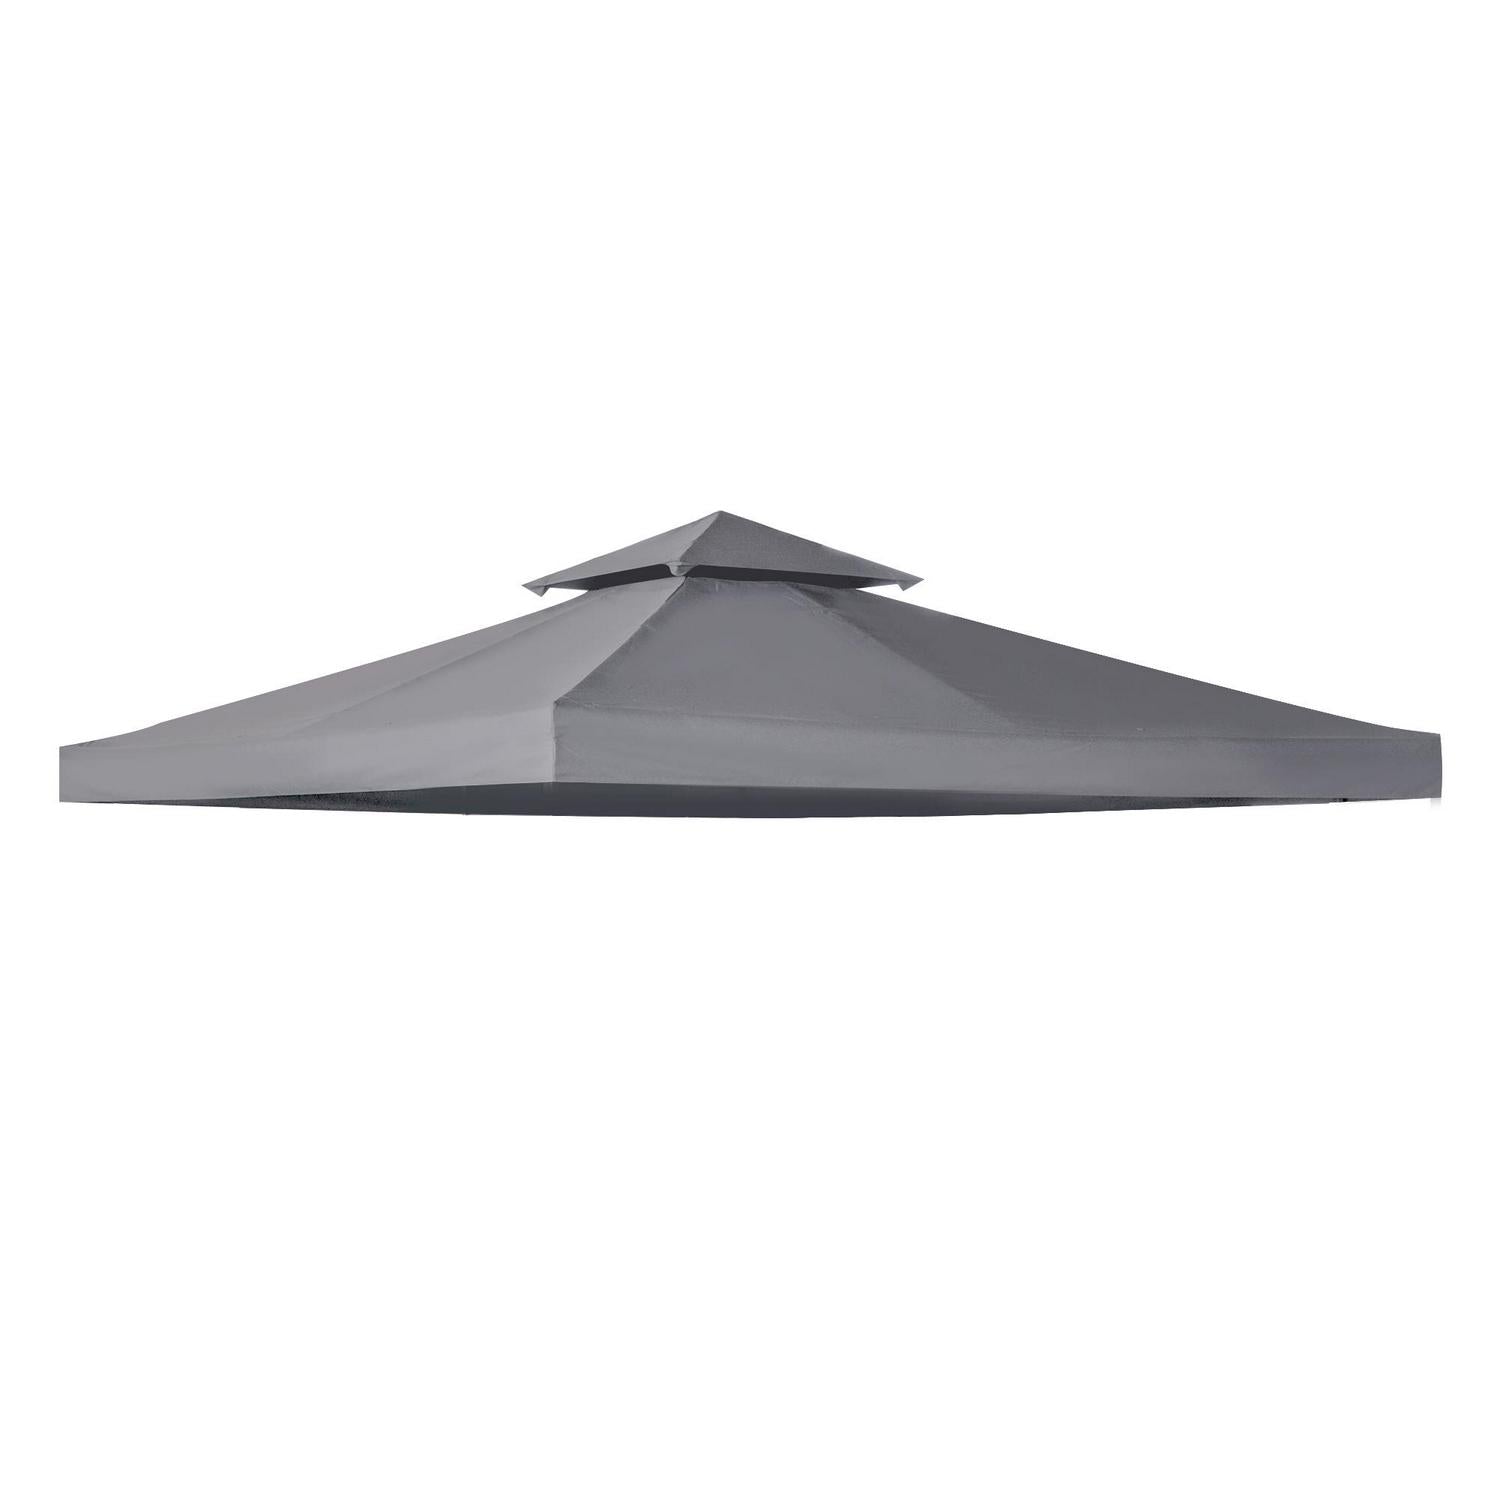 Gazebo Top Cover Double Tier Canopy Replacement Pavilion Roof Deep Grey